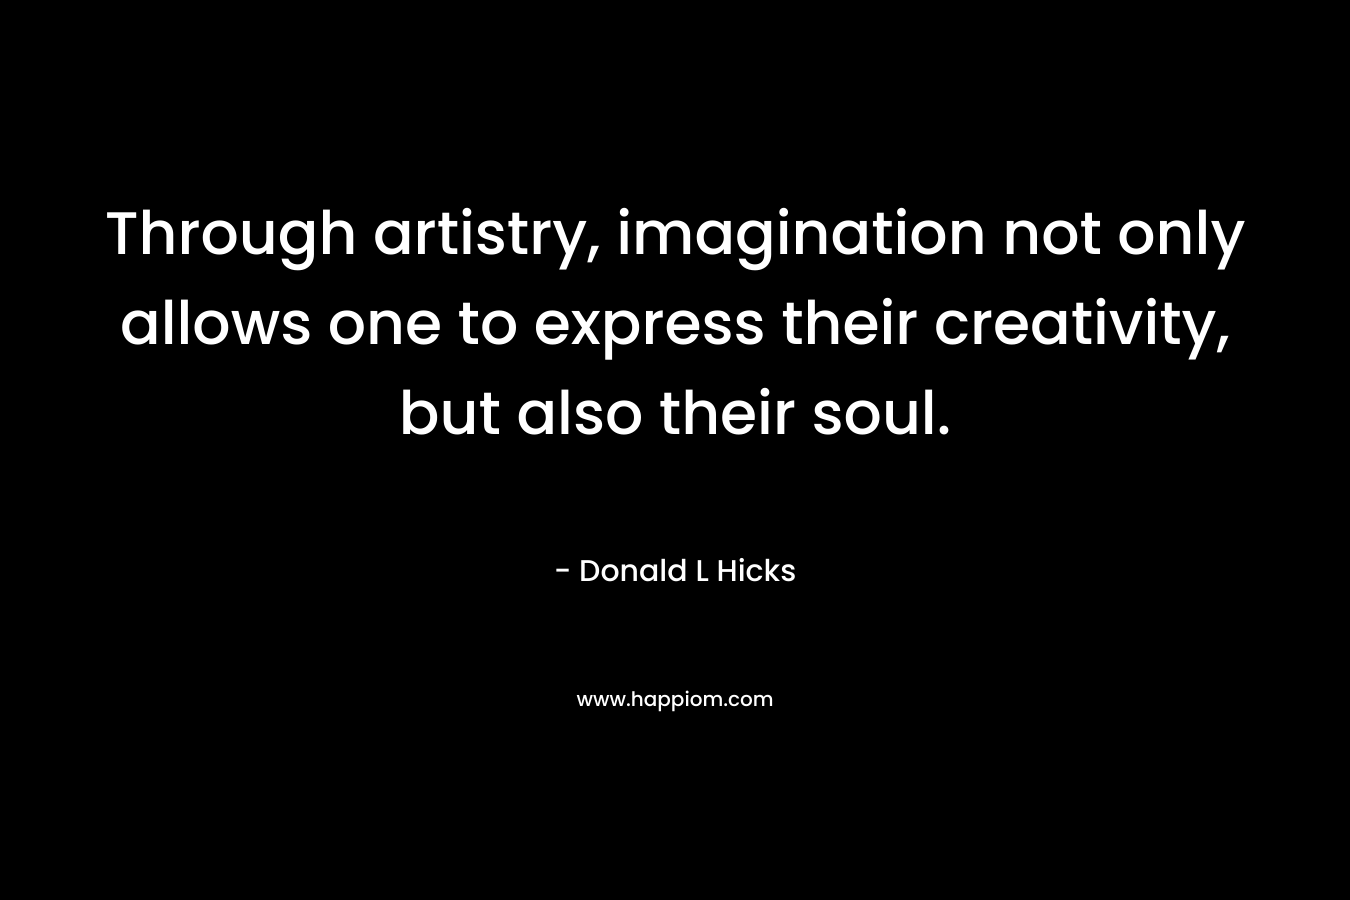 Through artistry, imagination not only allows one to express their creativity, but also their soul. – Donald L Hicks